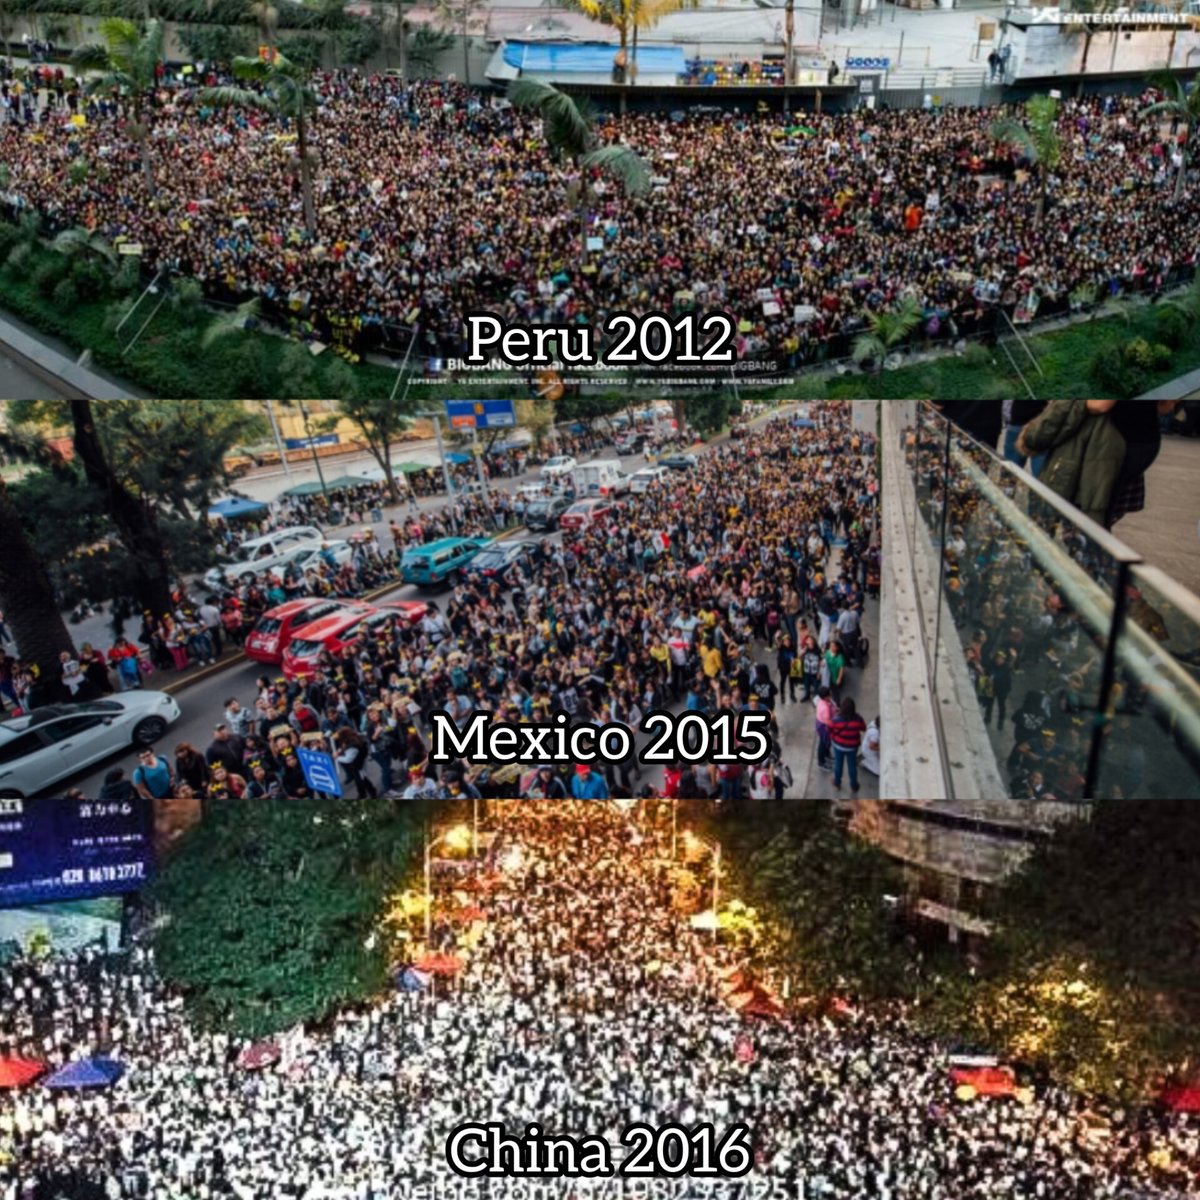 RT @8KLIFE: Thousands of fans waiting to see #BIGBANG on streets in Peru, Mexico and China. https://t.co/nyDGBErLuG